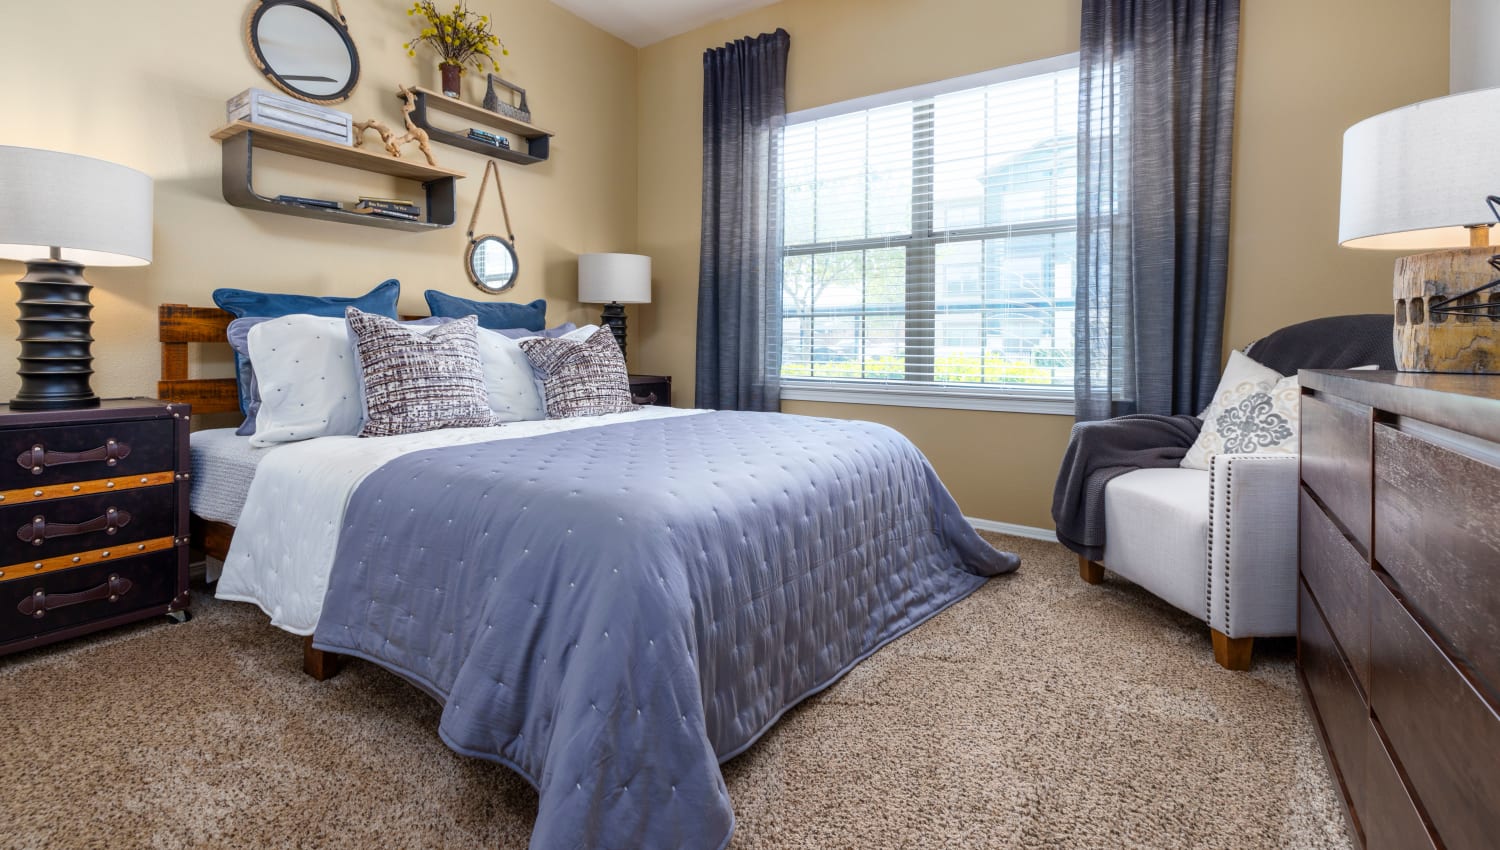 Fully carpeted bedroom at Carrington Oaks in Buda, Texas